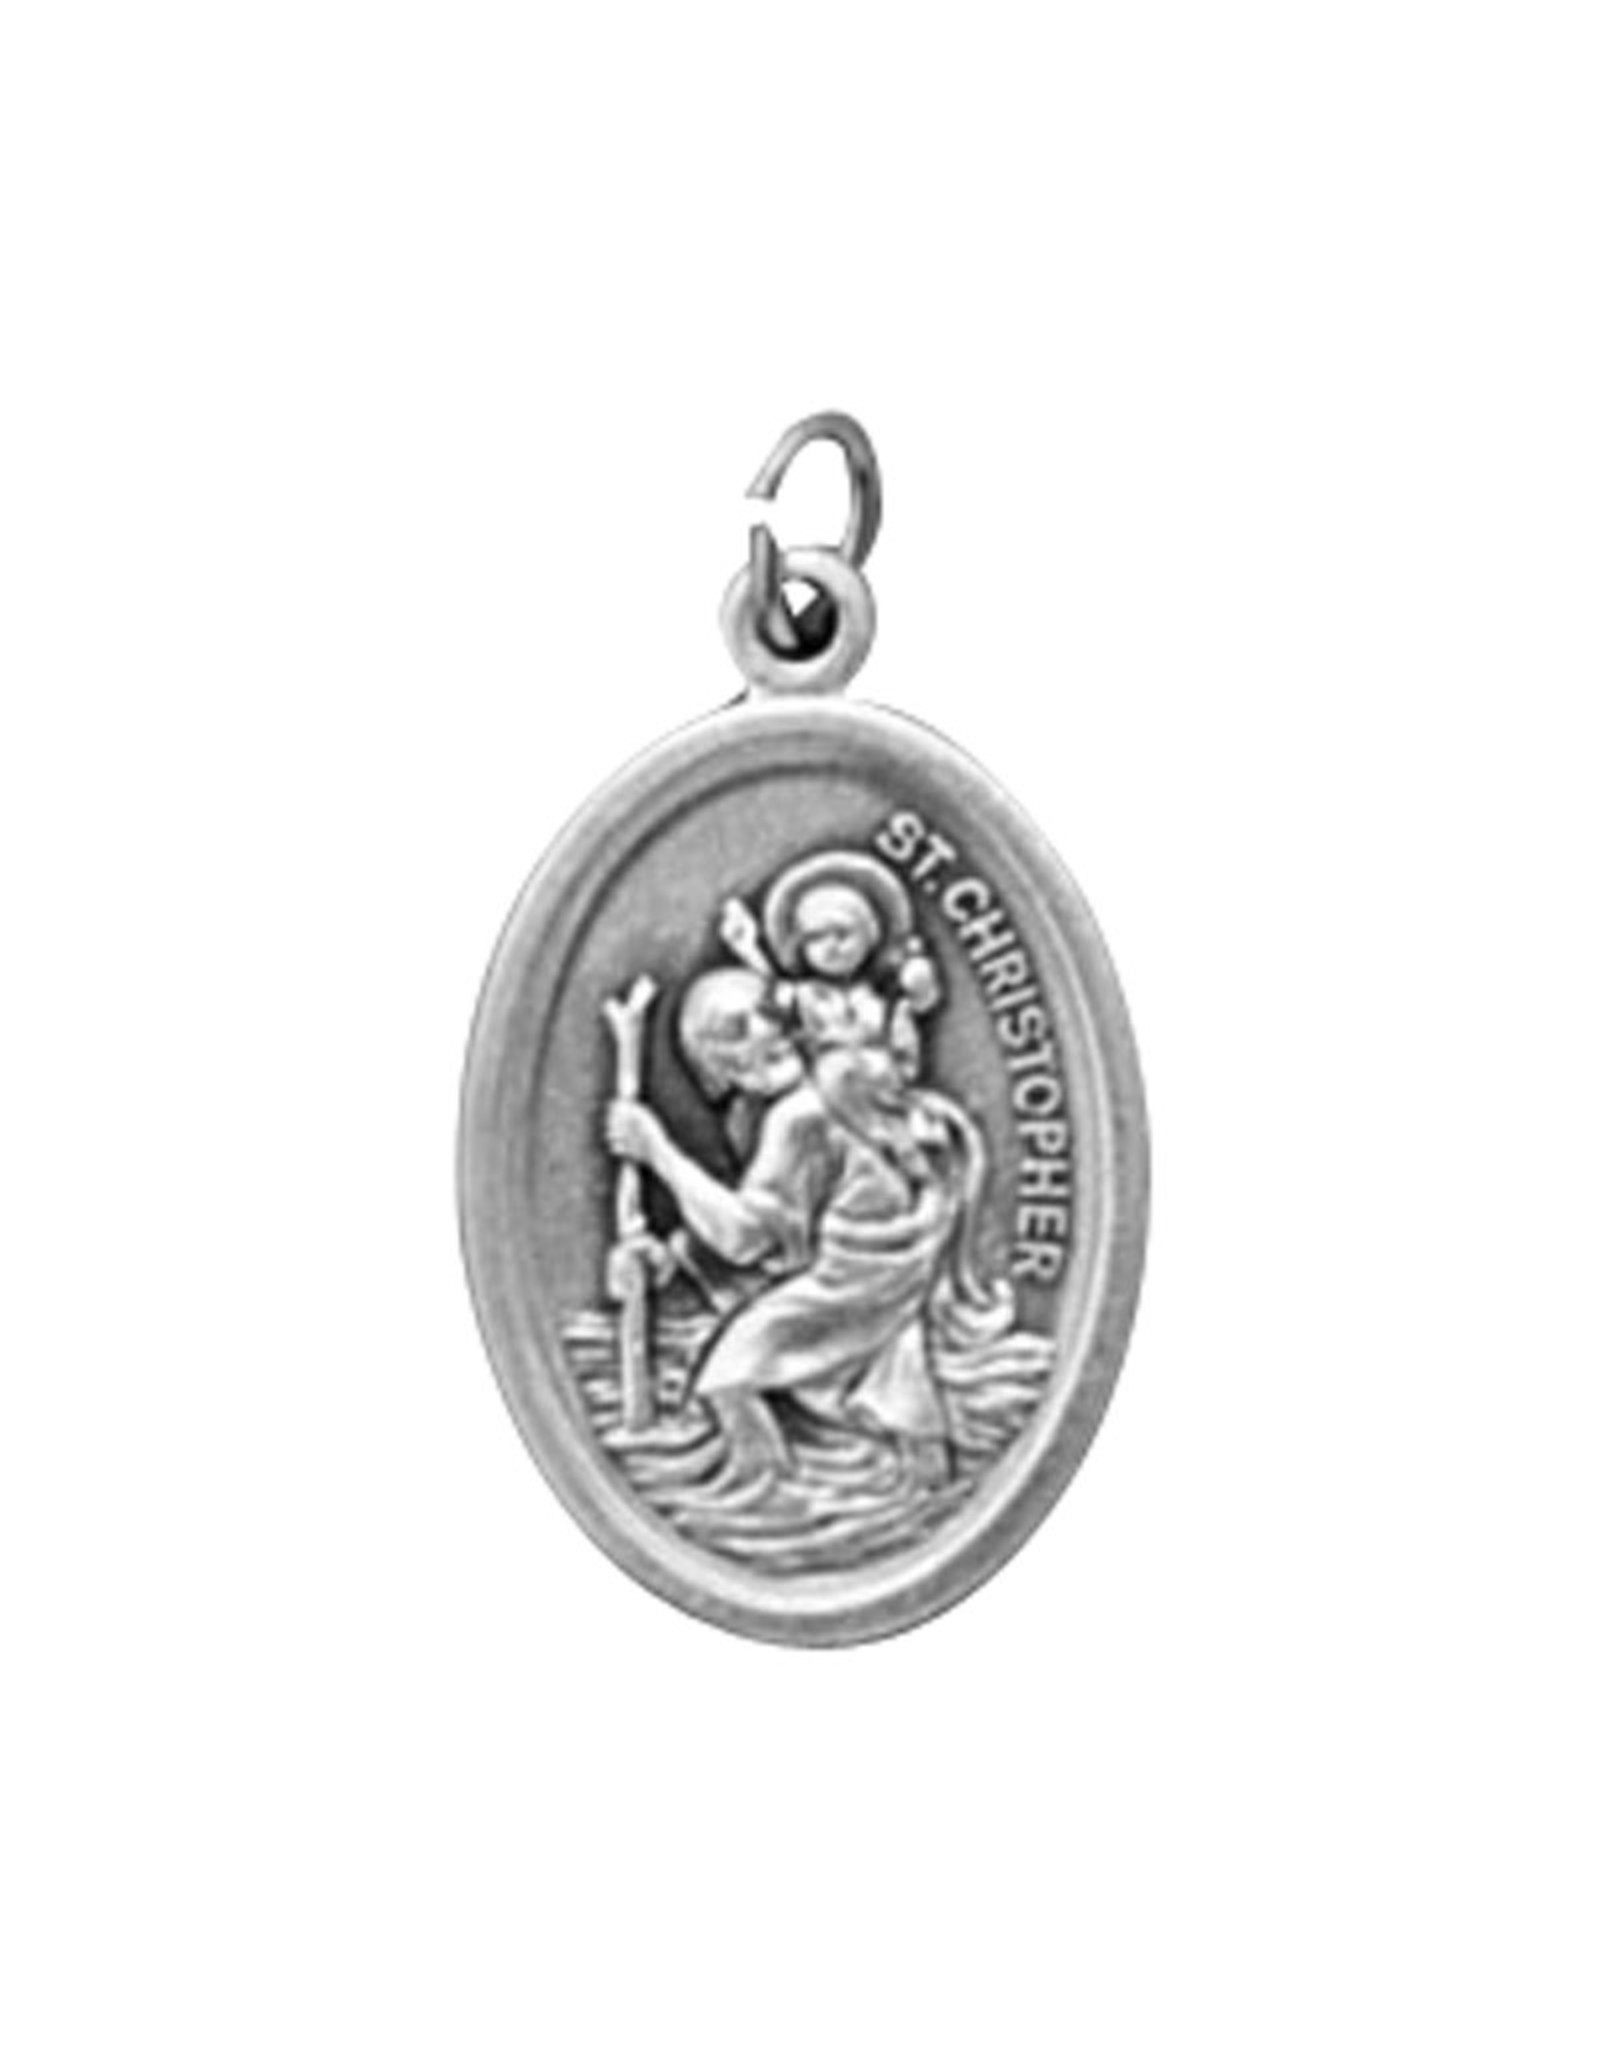 Autom St. Christopher/Protect Us Oxidized Medal, 1"H